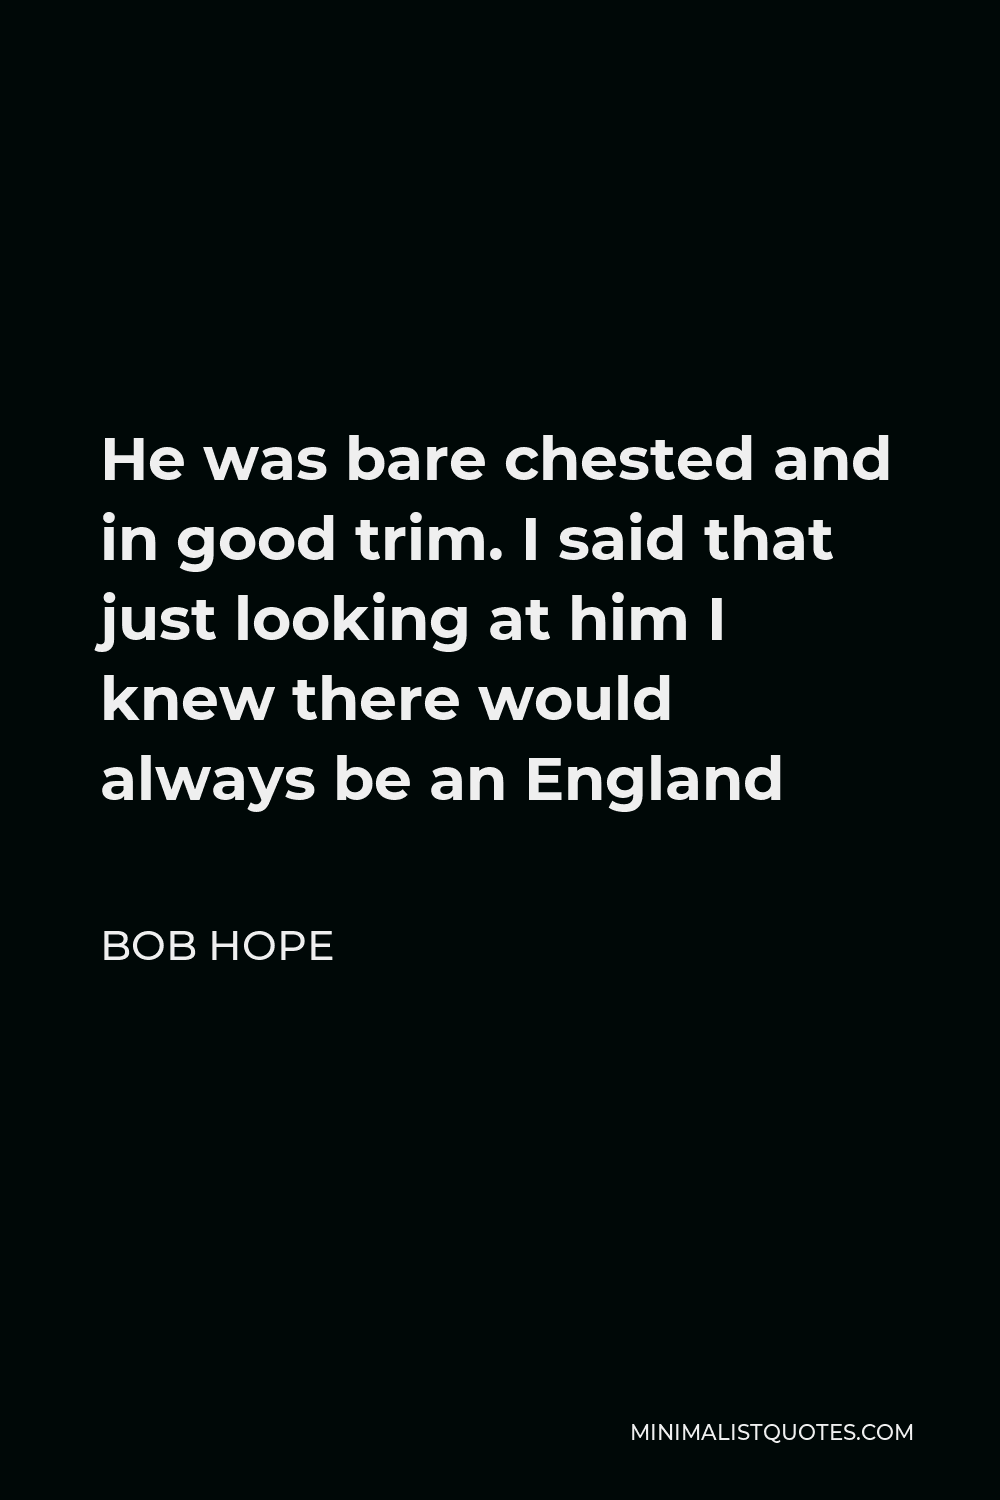 Bob Hope Quote - He was bare chested and in good trim. I said that just looking at him I knew there would always be an England